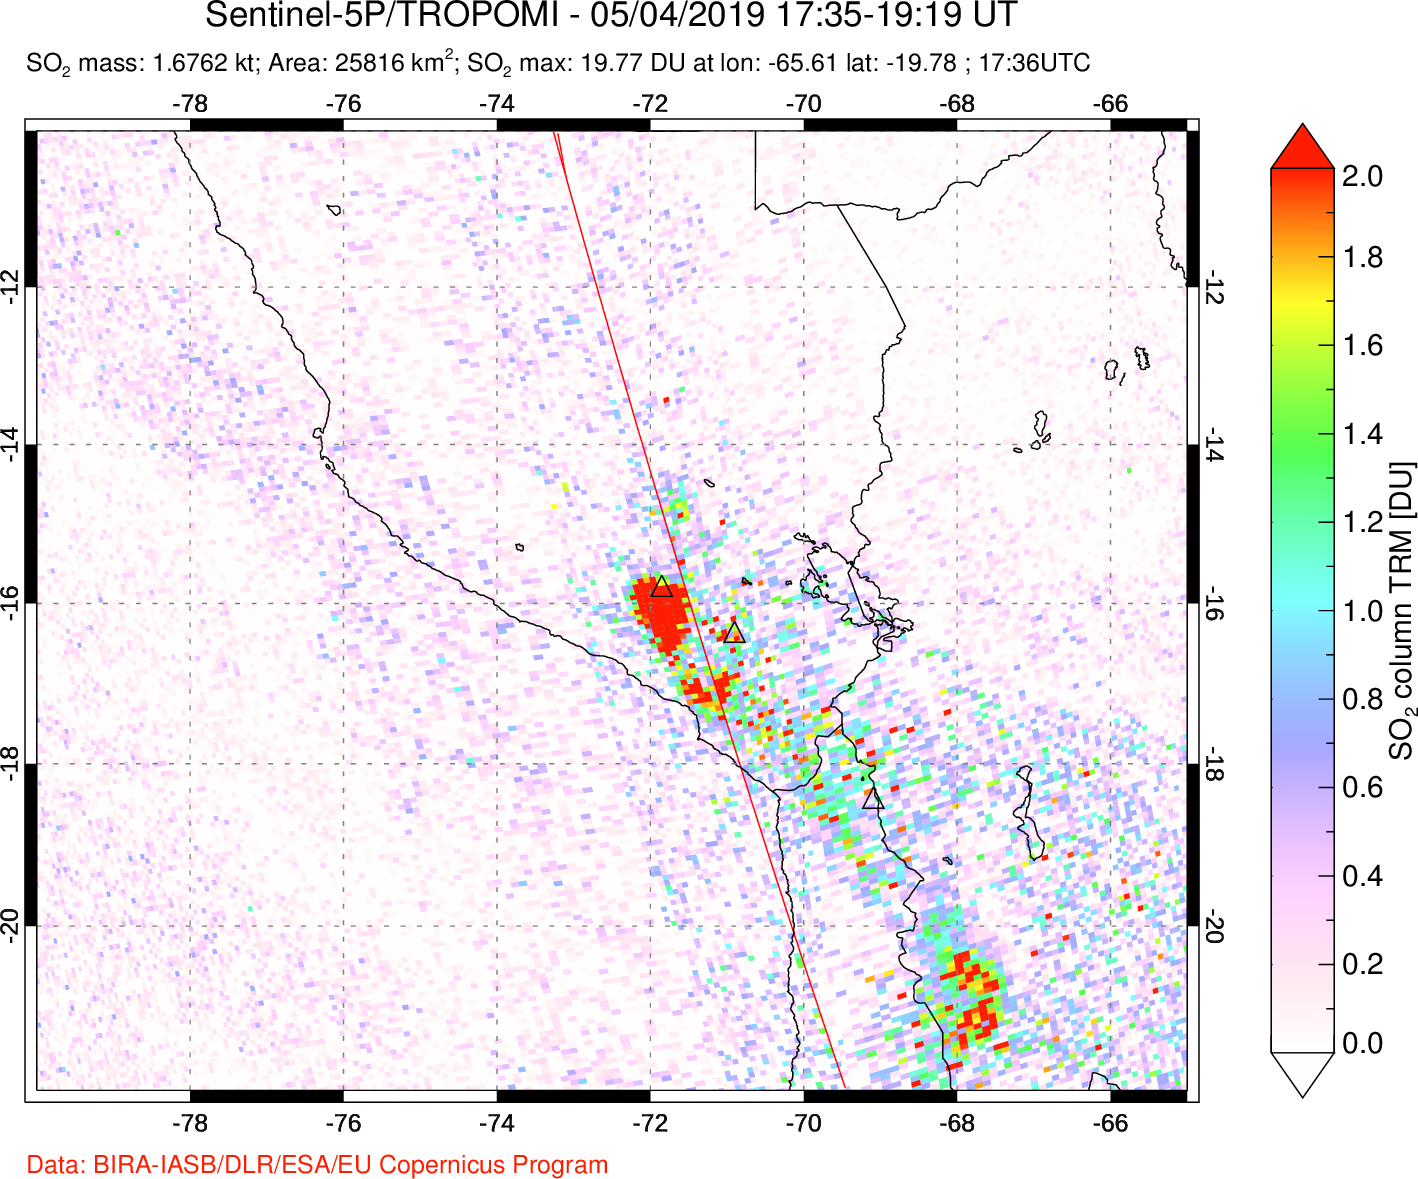 A sulfur dioxide image over Peru on May 04, 2019.